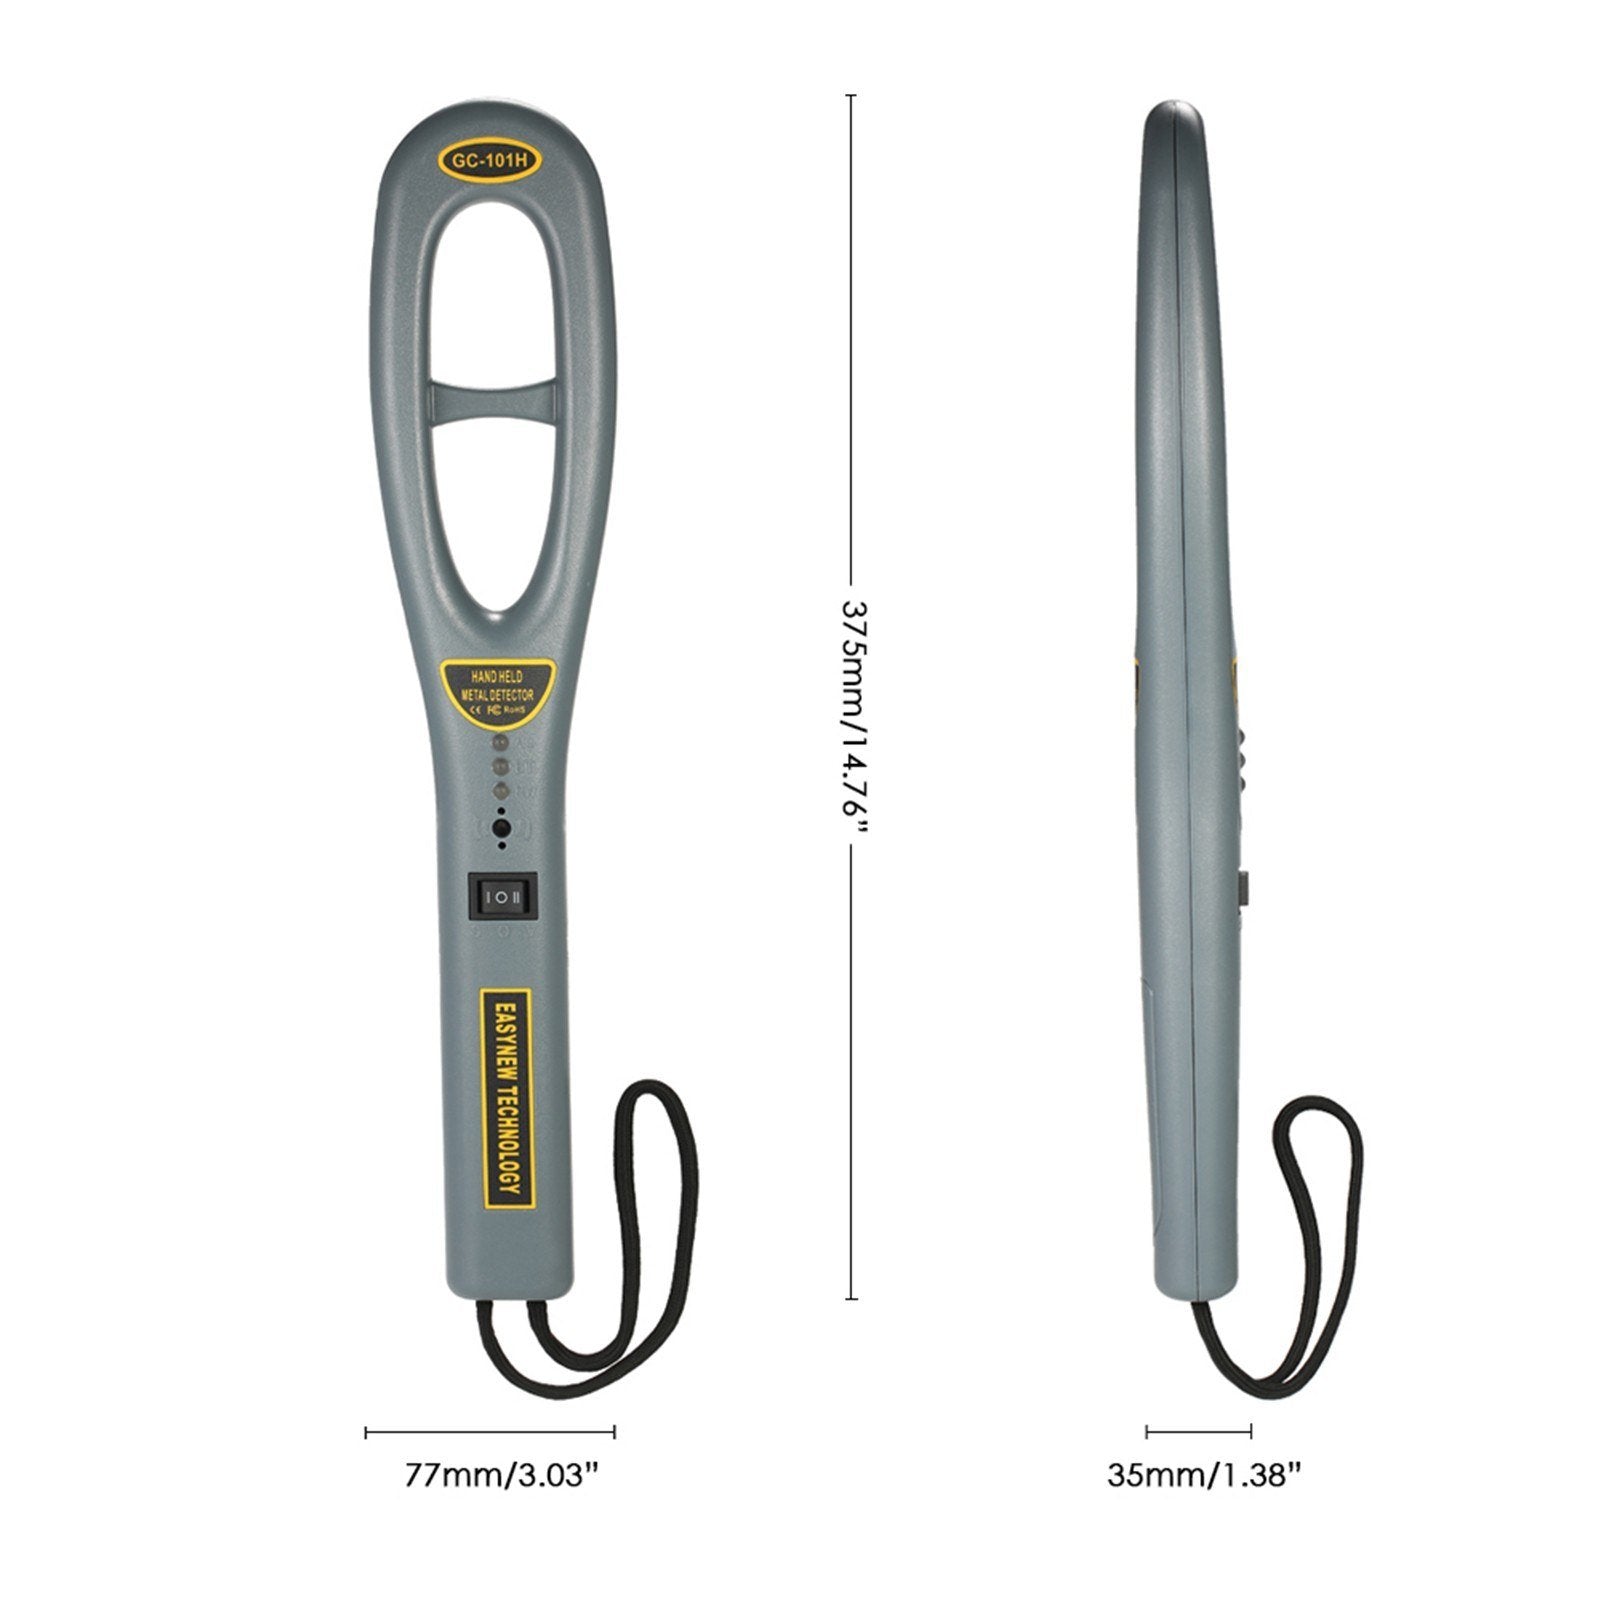 Portable Handheld Metal Detector High Sensitivity Safety Inspection With Buzzer Vibration for Security Check